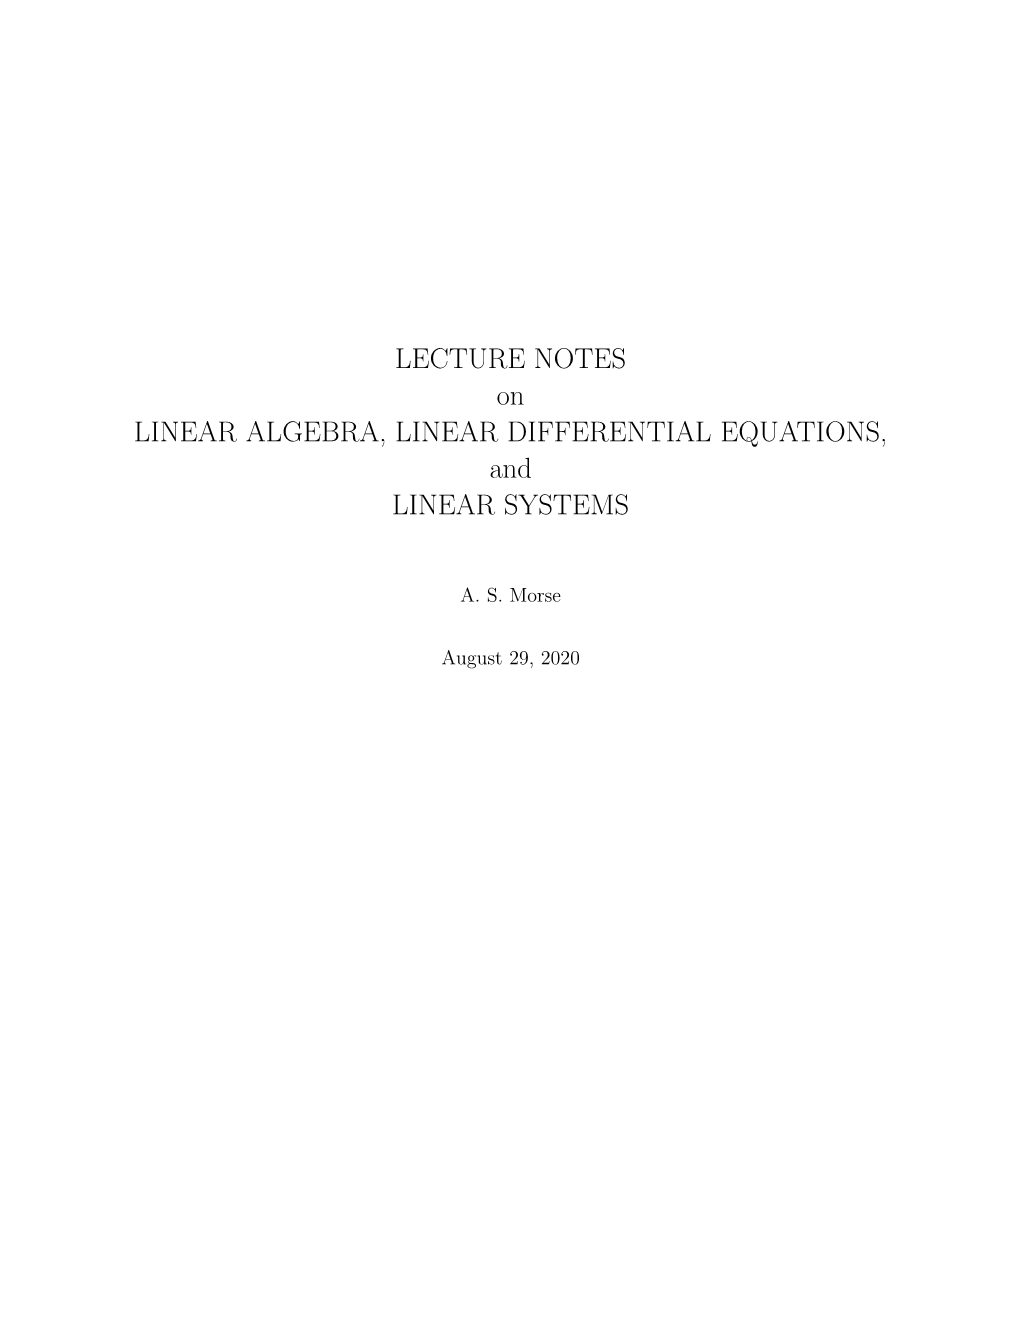 LECTURE NOTES on LINEAR ALGEBRA, LINEAR DIFFERENTIAL EQUATIONS, and LINEAR SYSTEMS